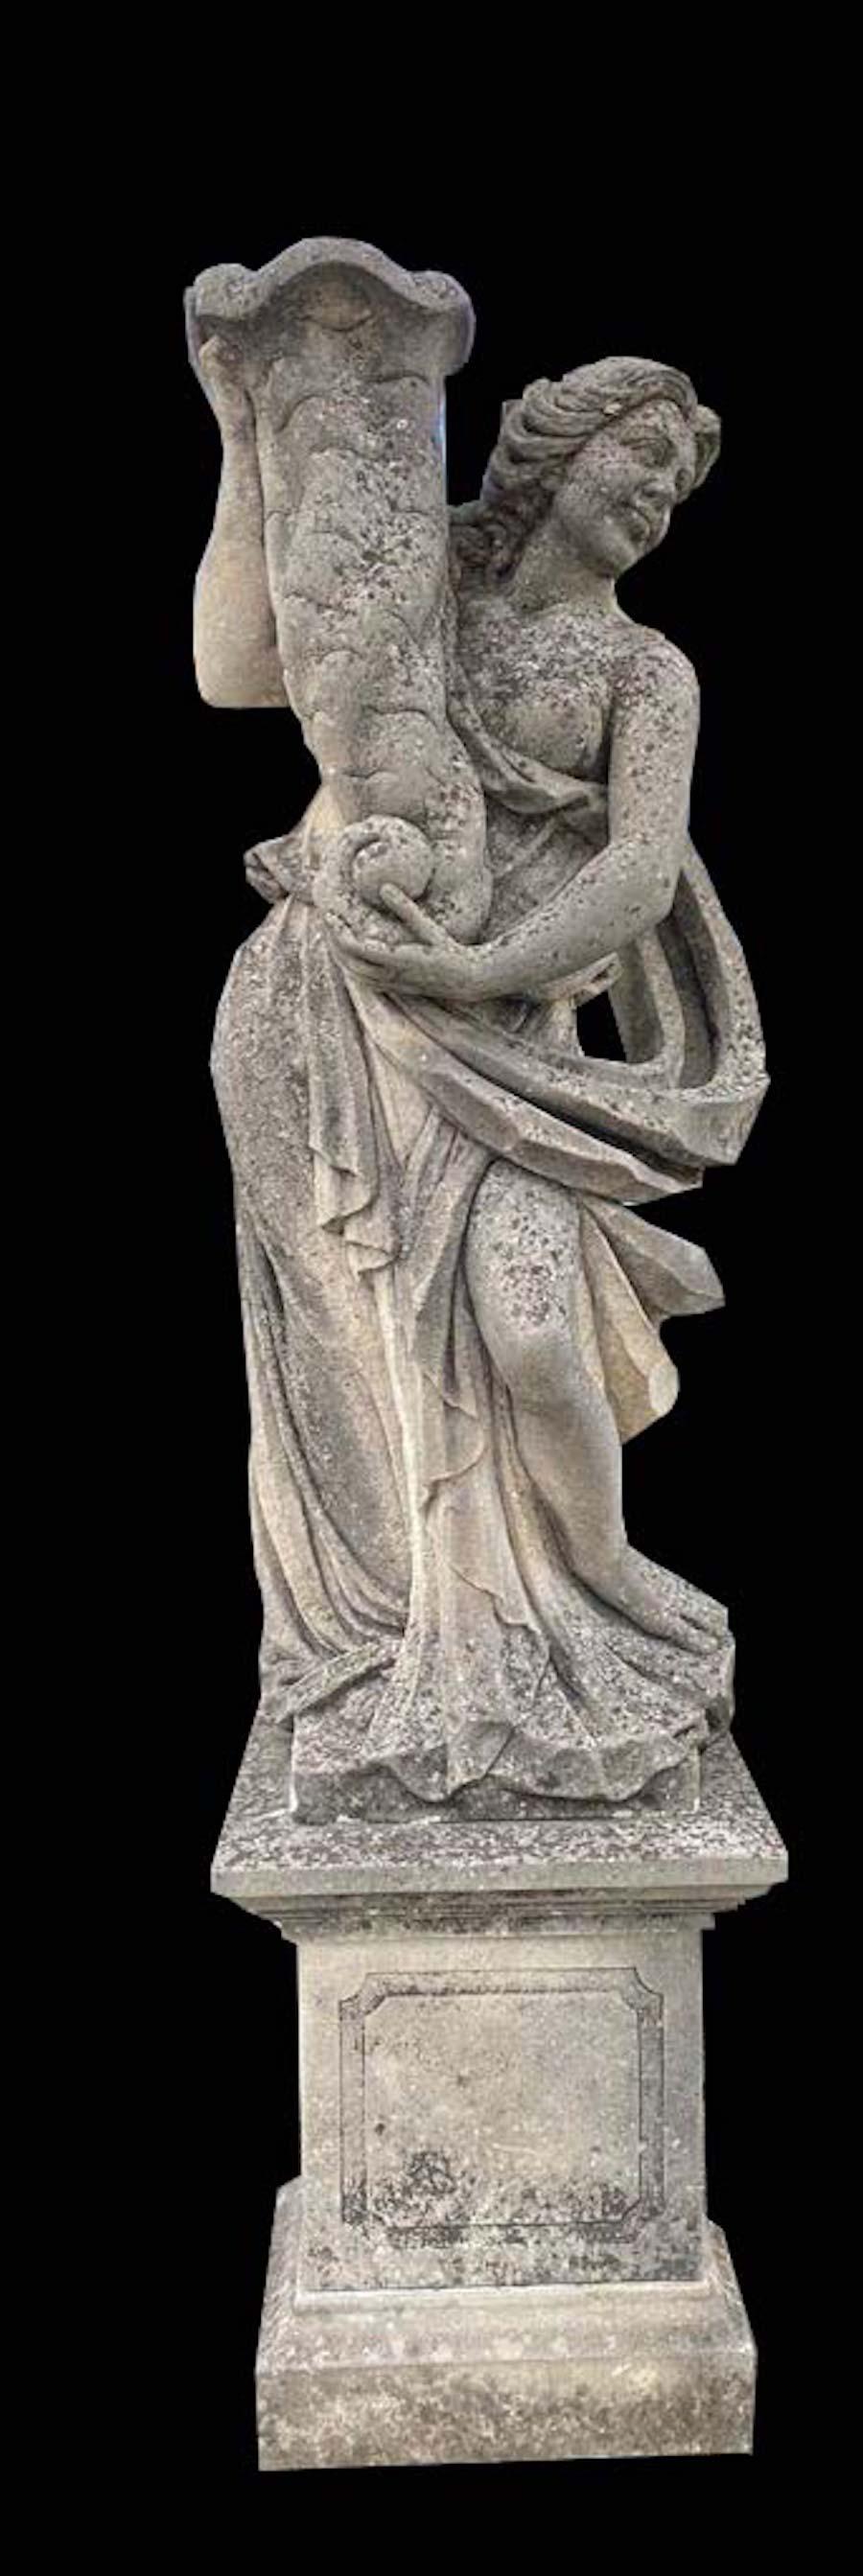 Finely carved mythological subject in limestone with Cornucopia associated with the harvest, prosperity, or spiritual abundance. Excellent condition from an estate of Veneto.

Measurements: Statue cm 160, base cm 70.